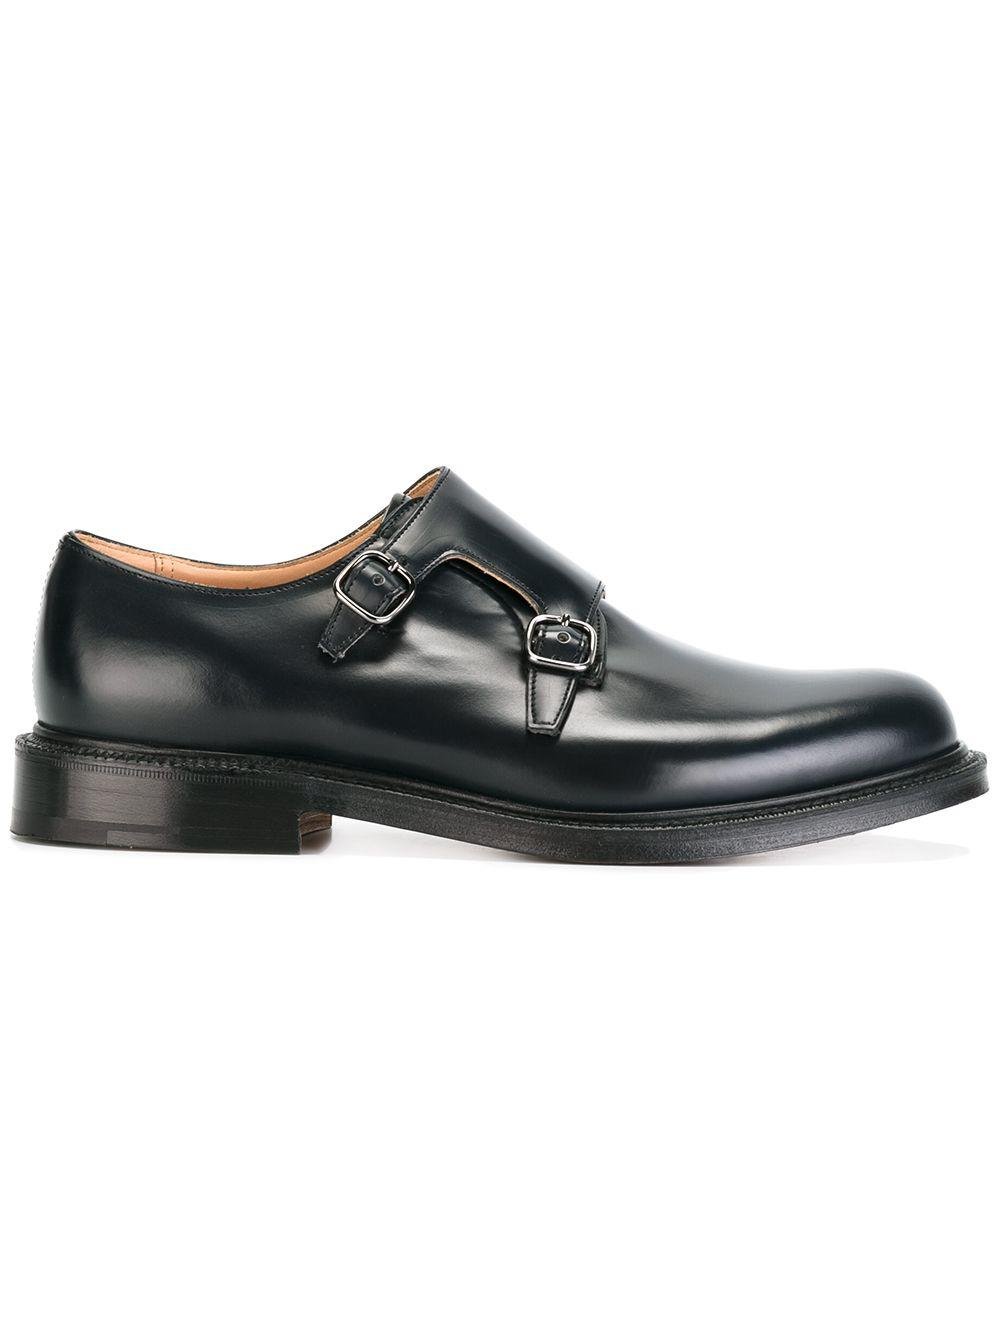 Church's Leather 'lambourn' Monk Shoes in Blue for Men - Lyst